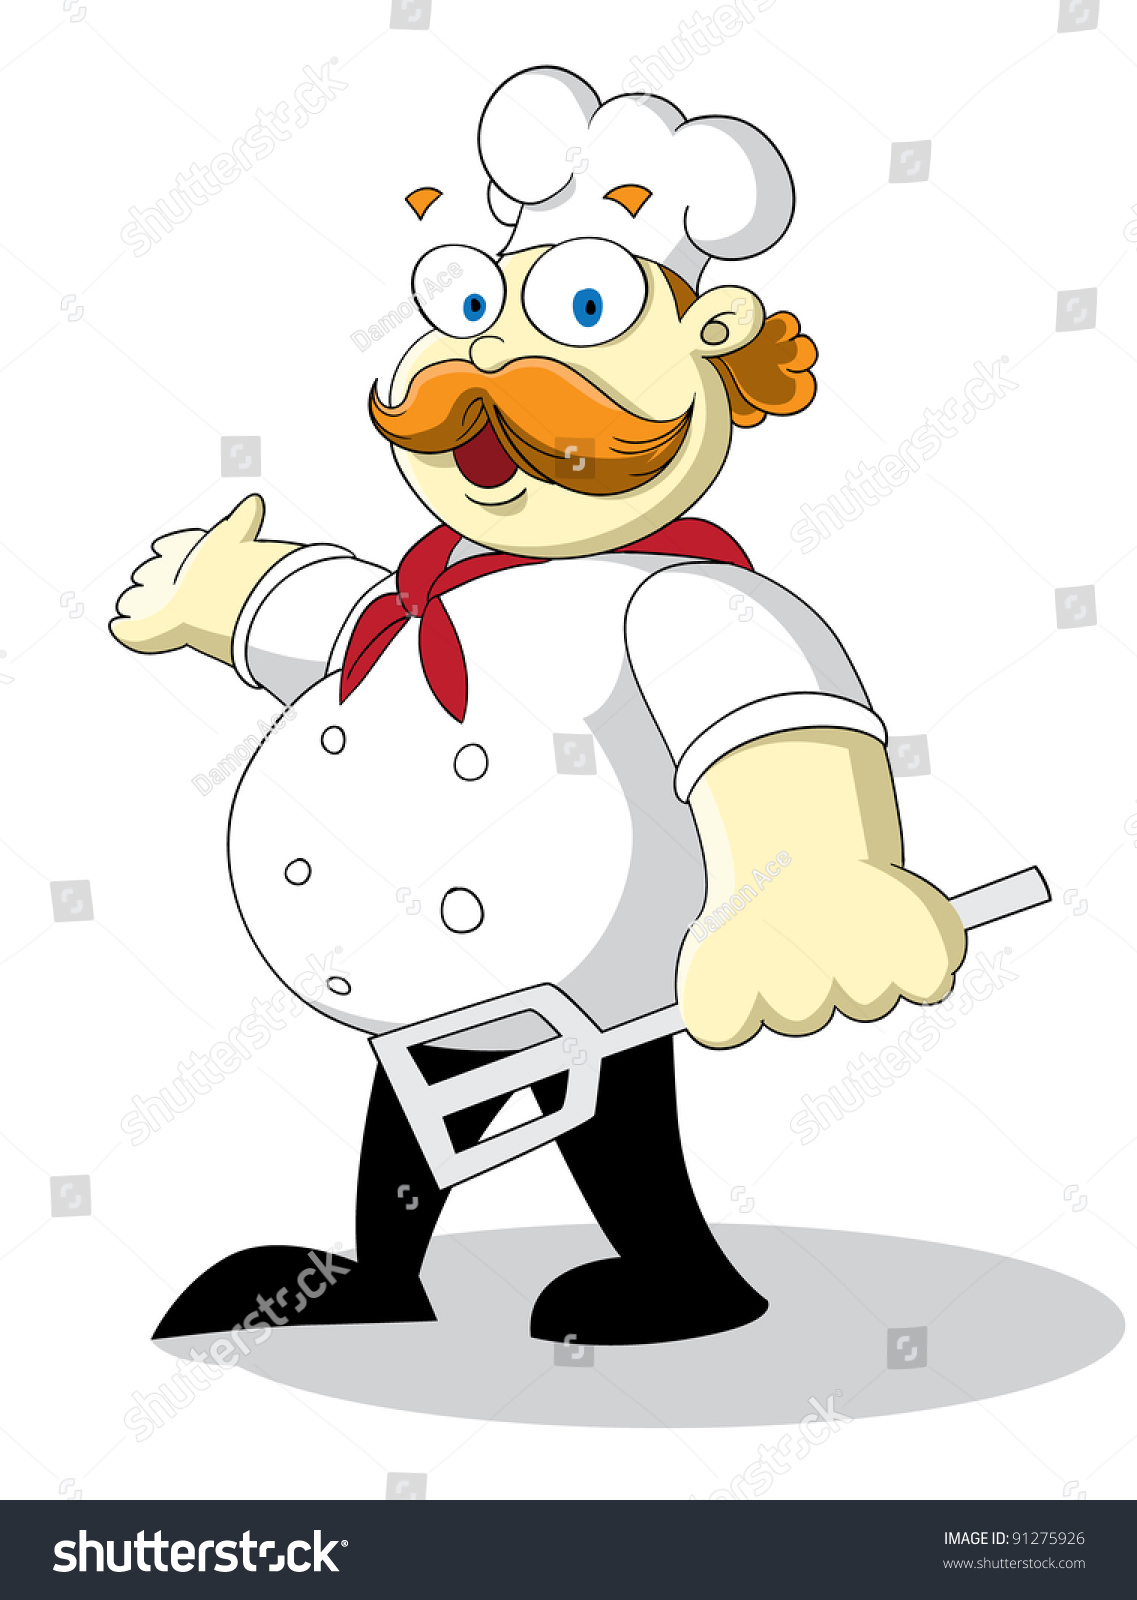 Cute Cartoon Character Of Profession (Chef) Holding A Spatula And